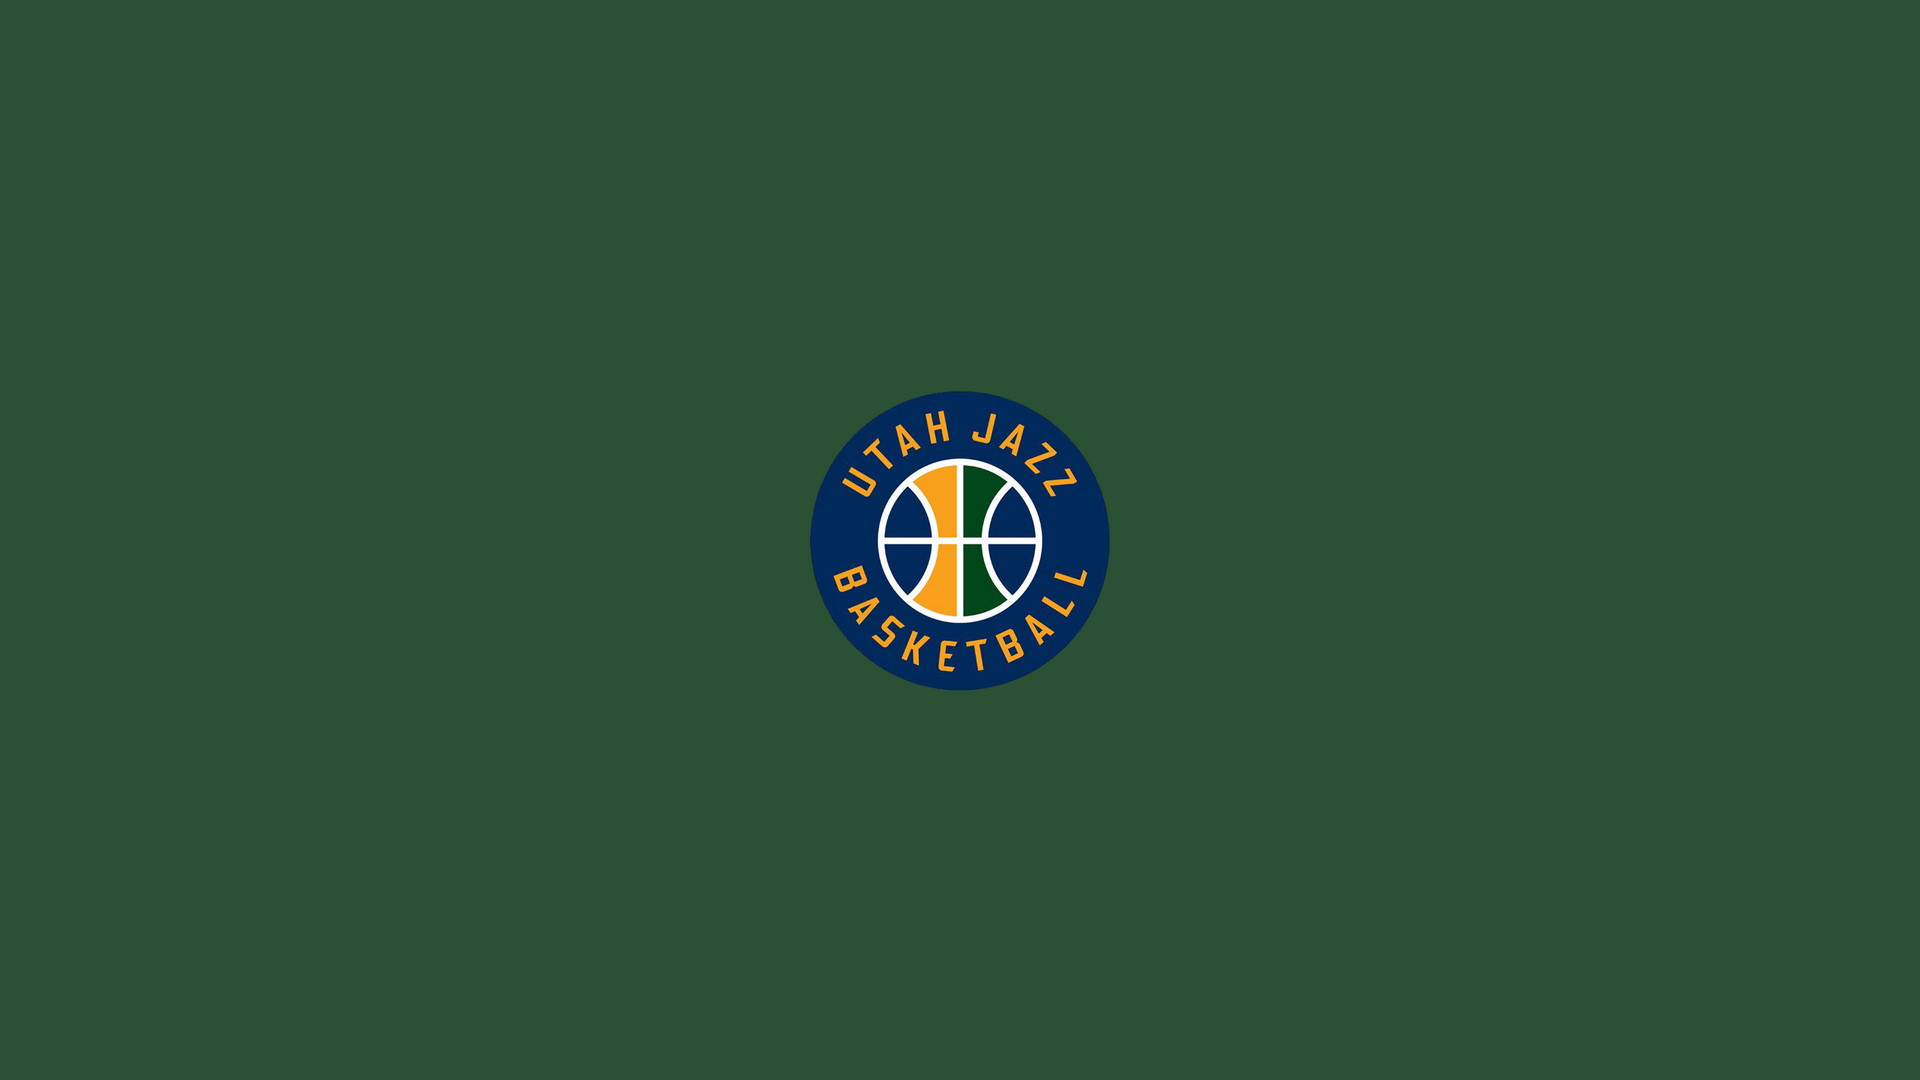 Windows Wallpaper Utah Jazz with high-resolution 1920x1080 pixel. You can use this wallpaper for your Desktop Computer Backgrounds, Windows or Mac Screensavers, iPhone Lock screen, Tablet or Android and another Mobile Phone device